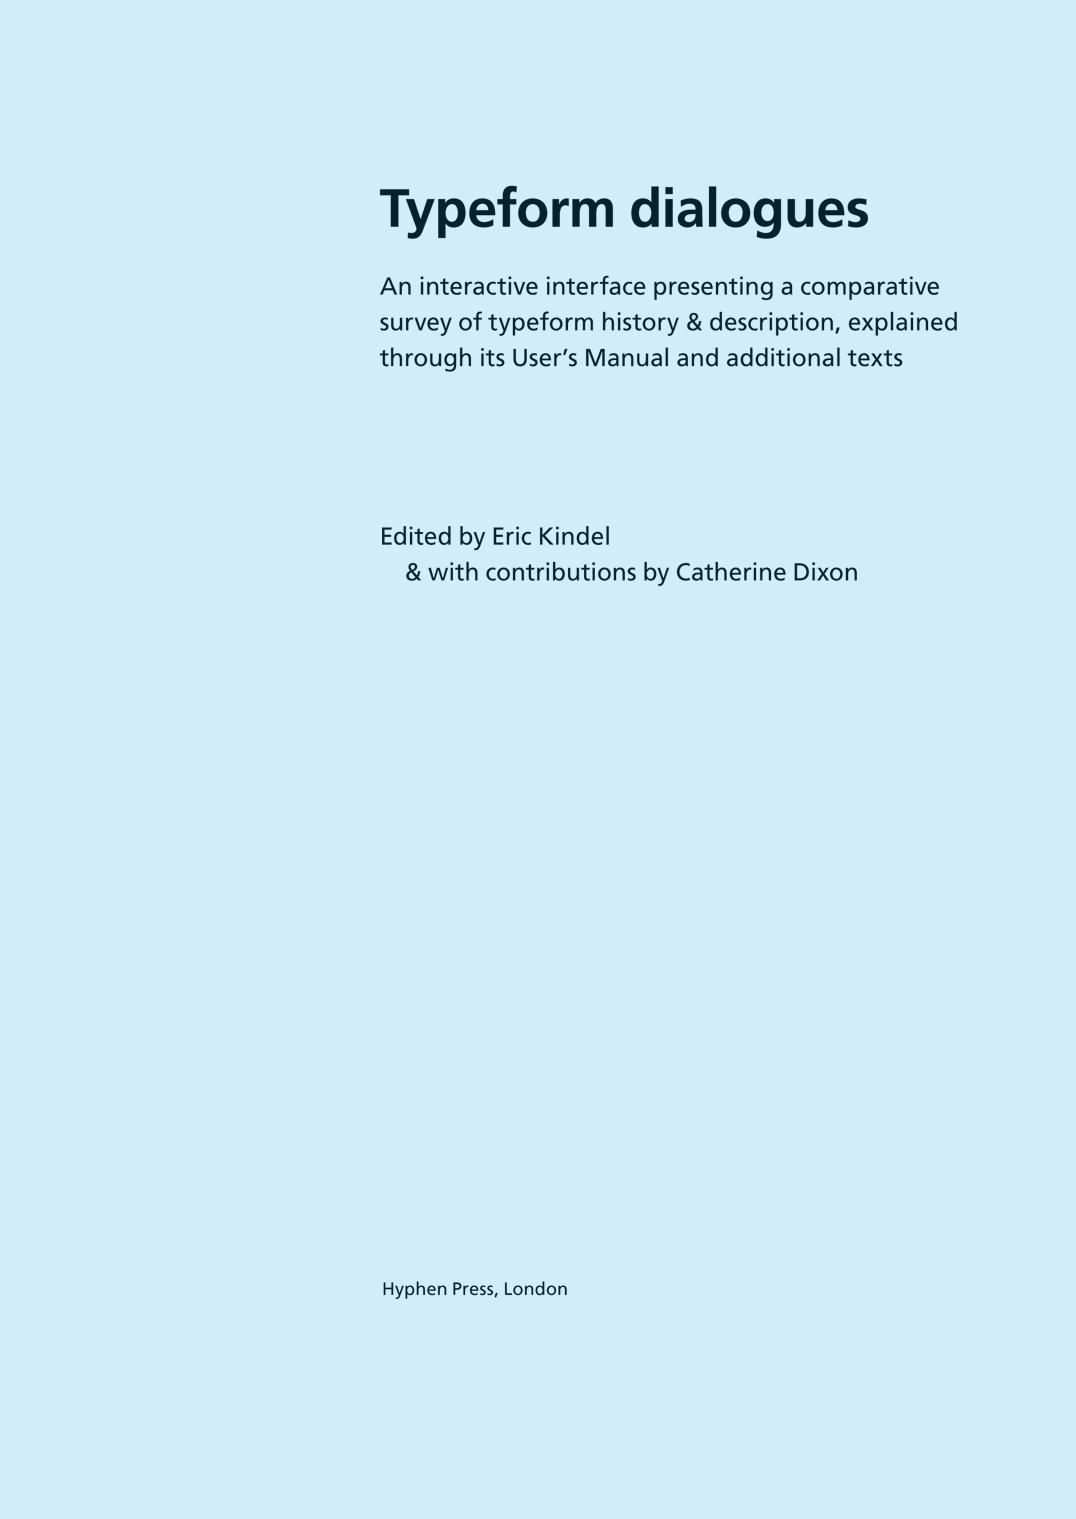 ‘Typeform dialogues’, second edition